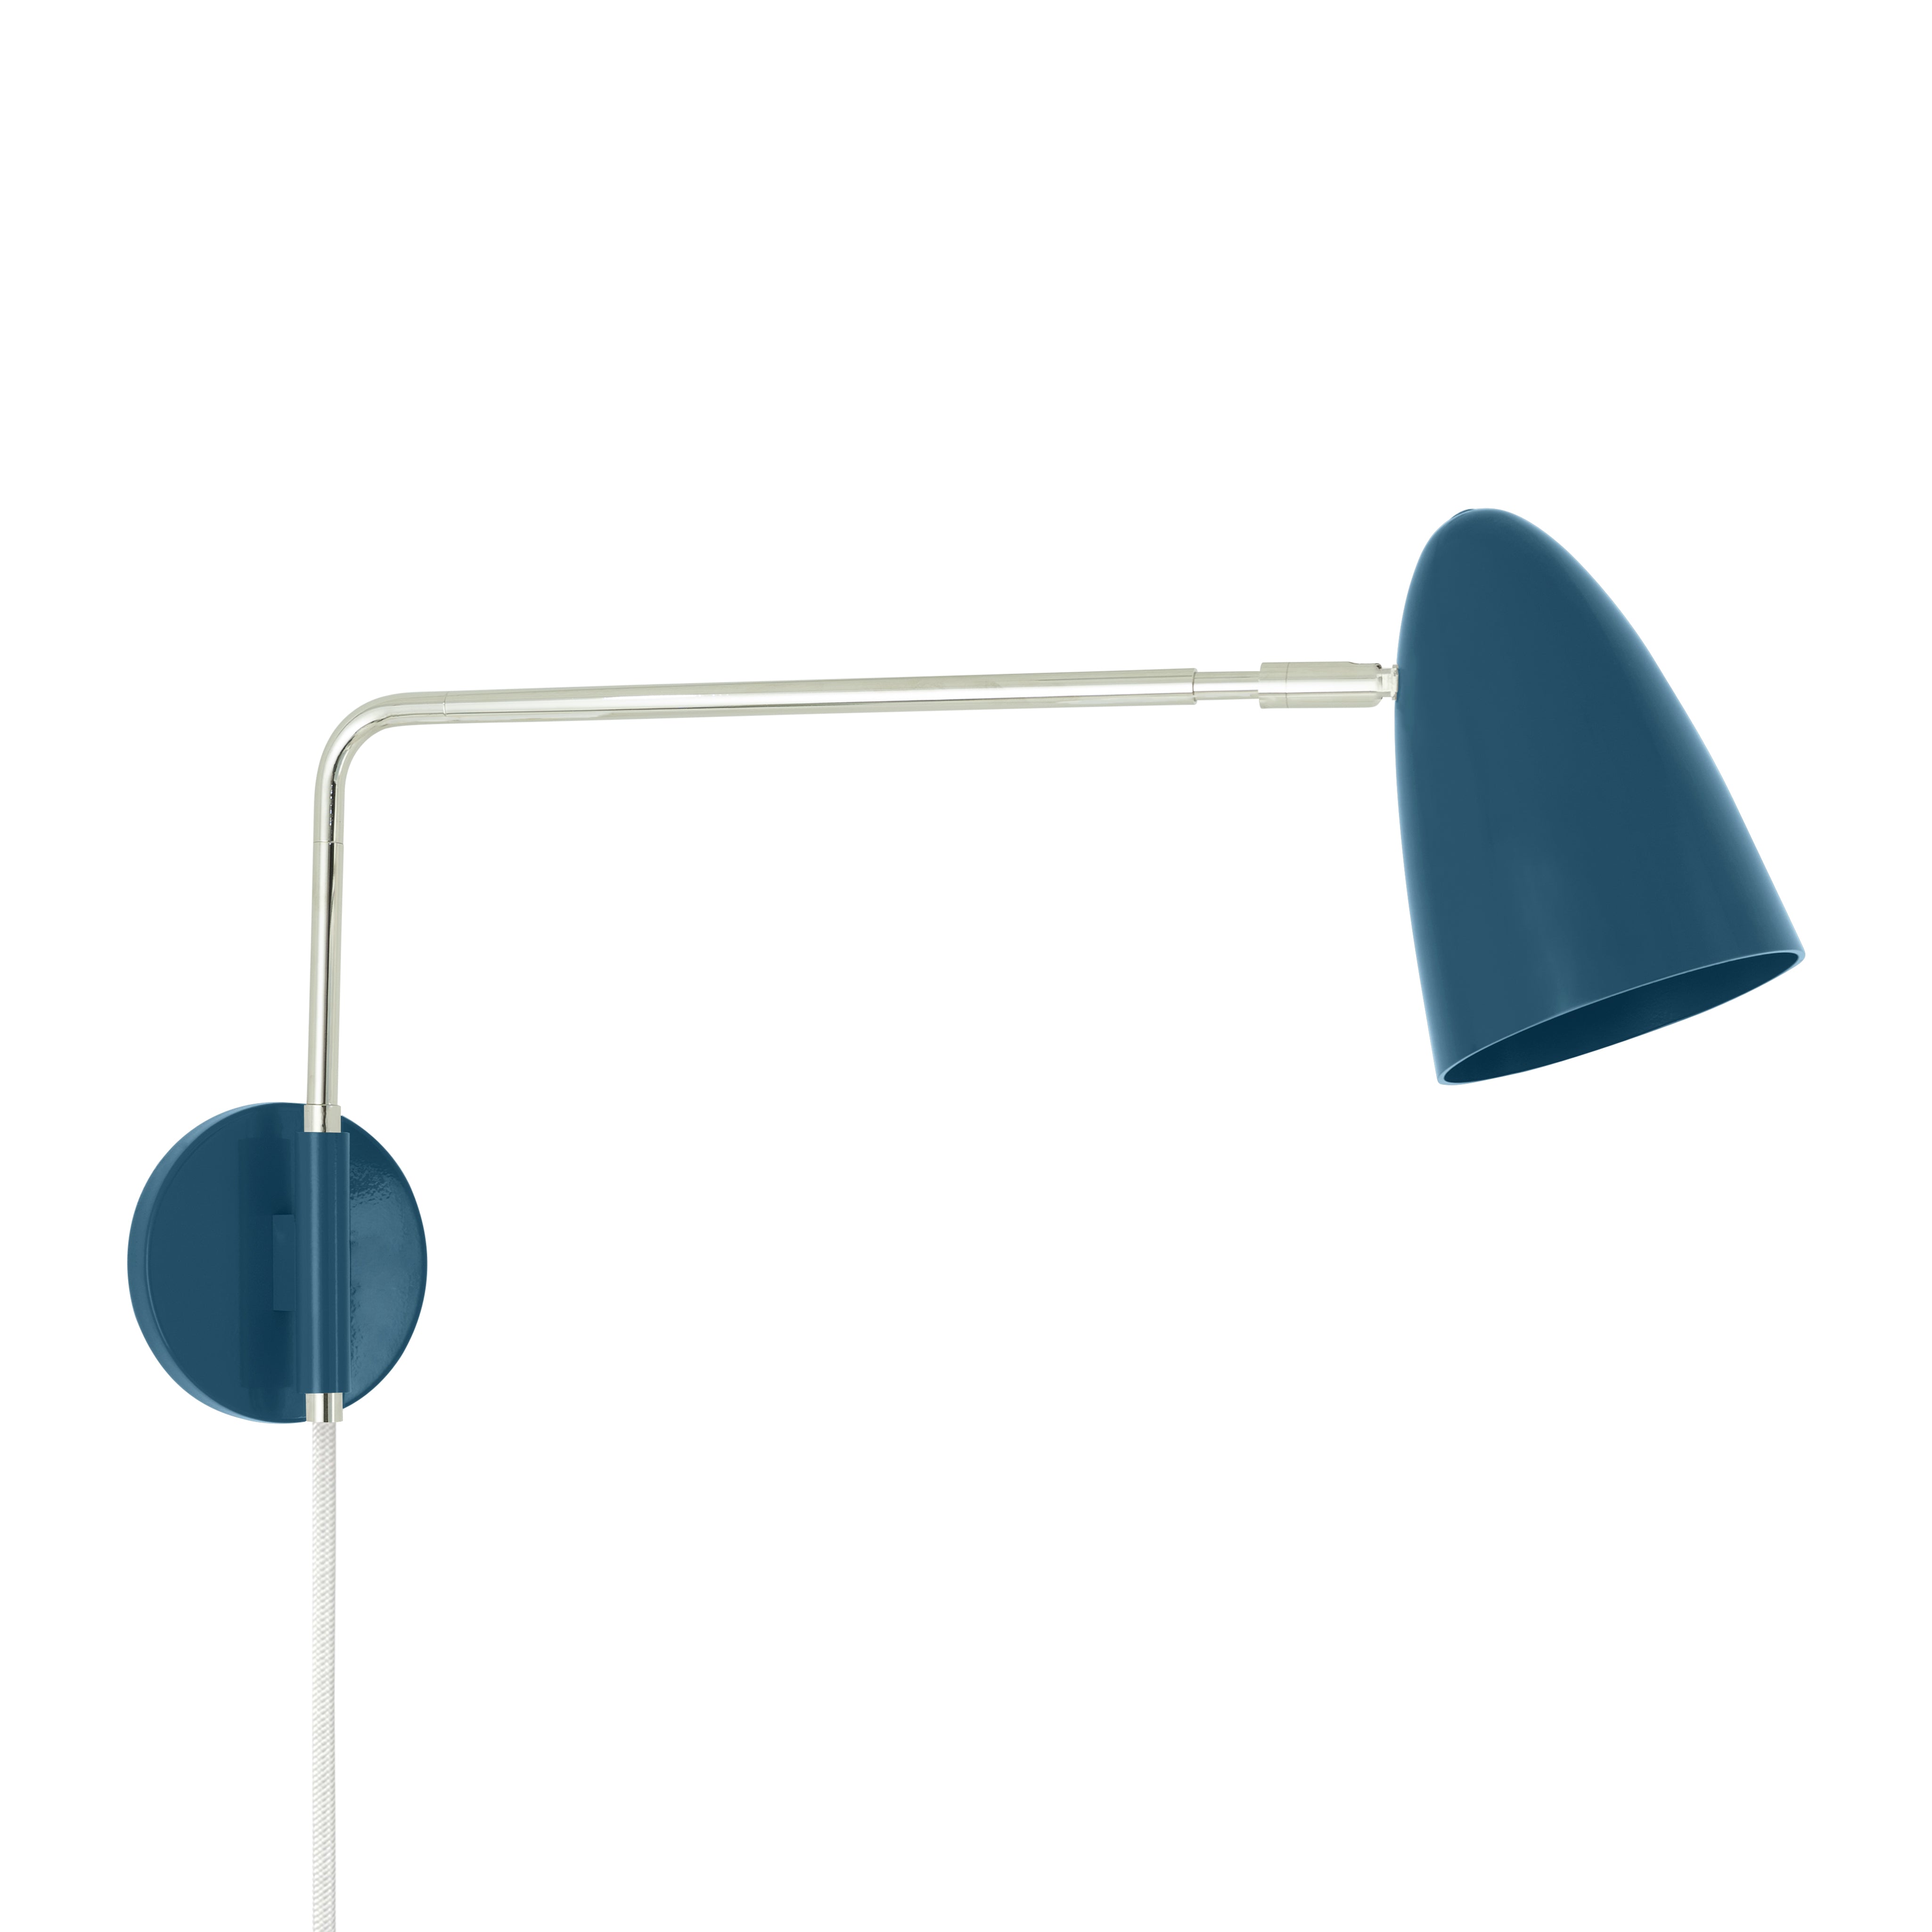 Nickel and slate blue color Boom Swing Arm plug-in sconce Dutton Brown lighting